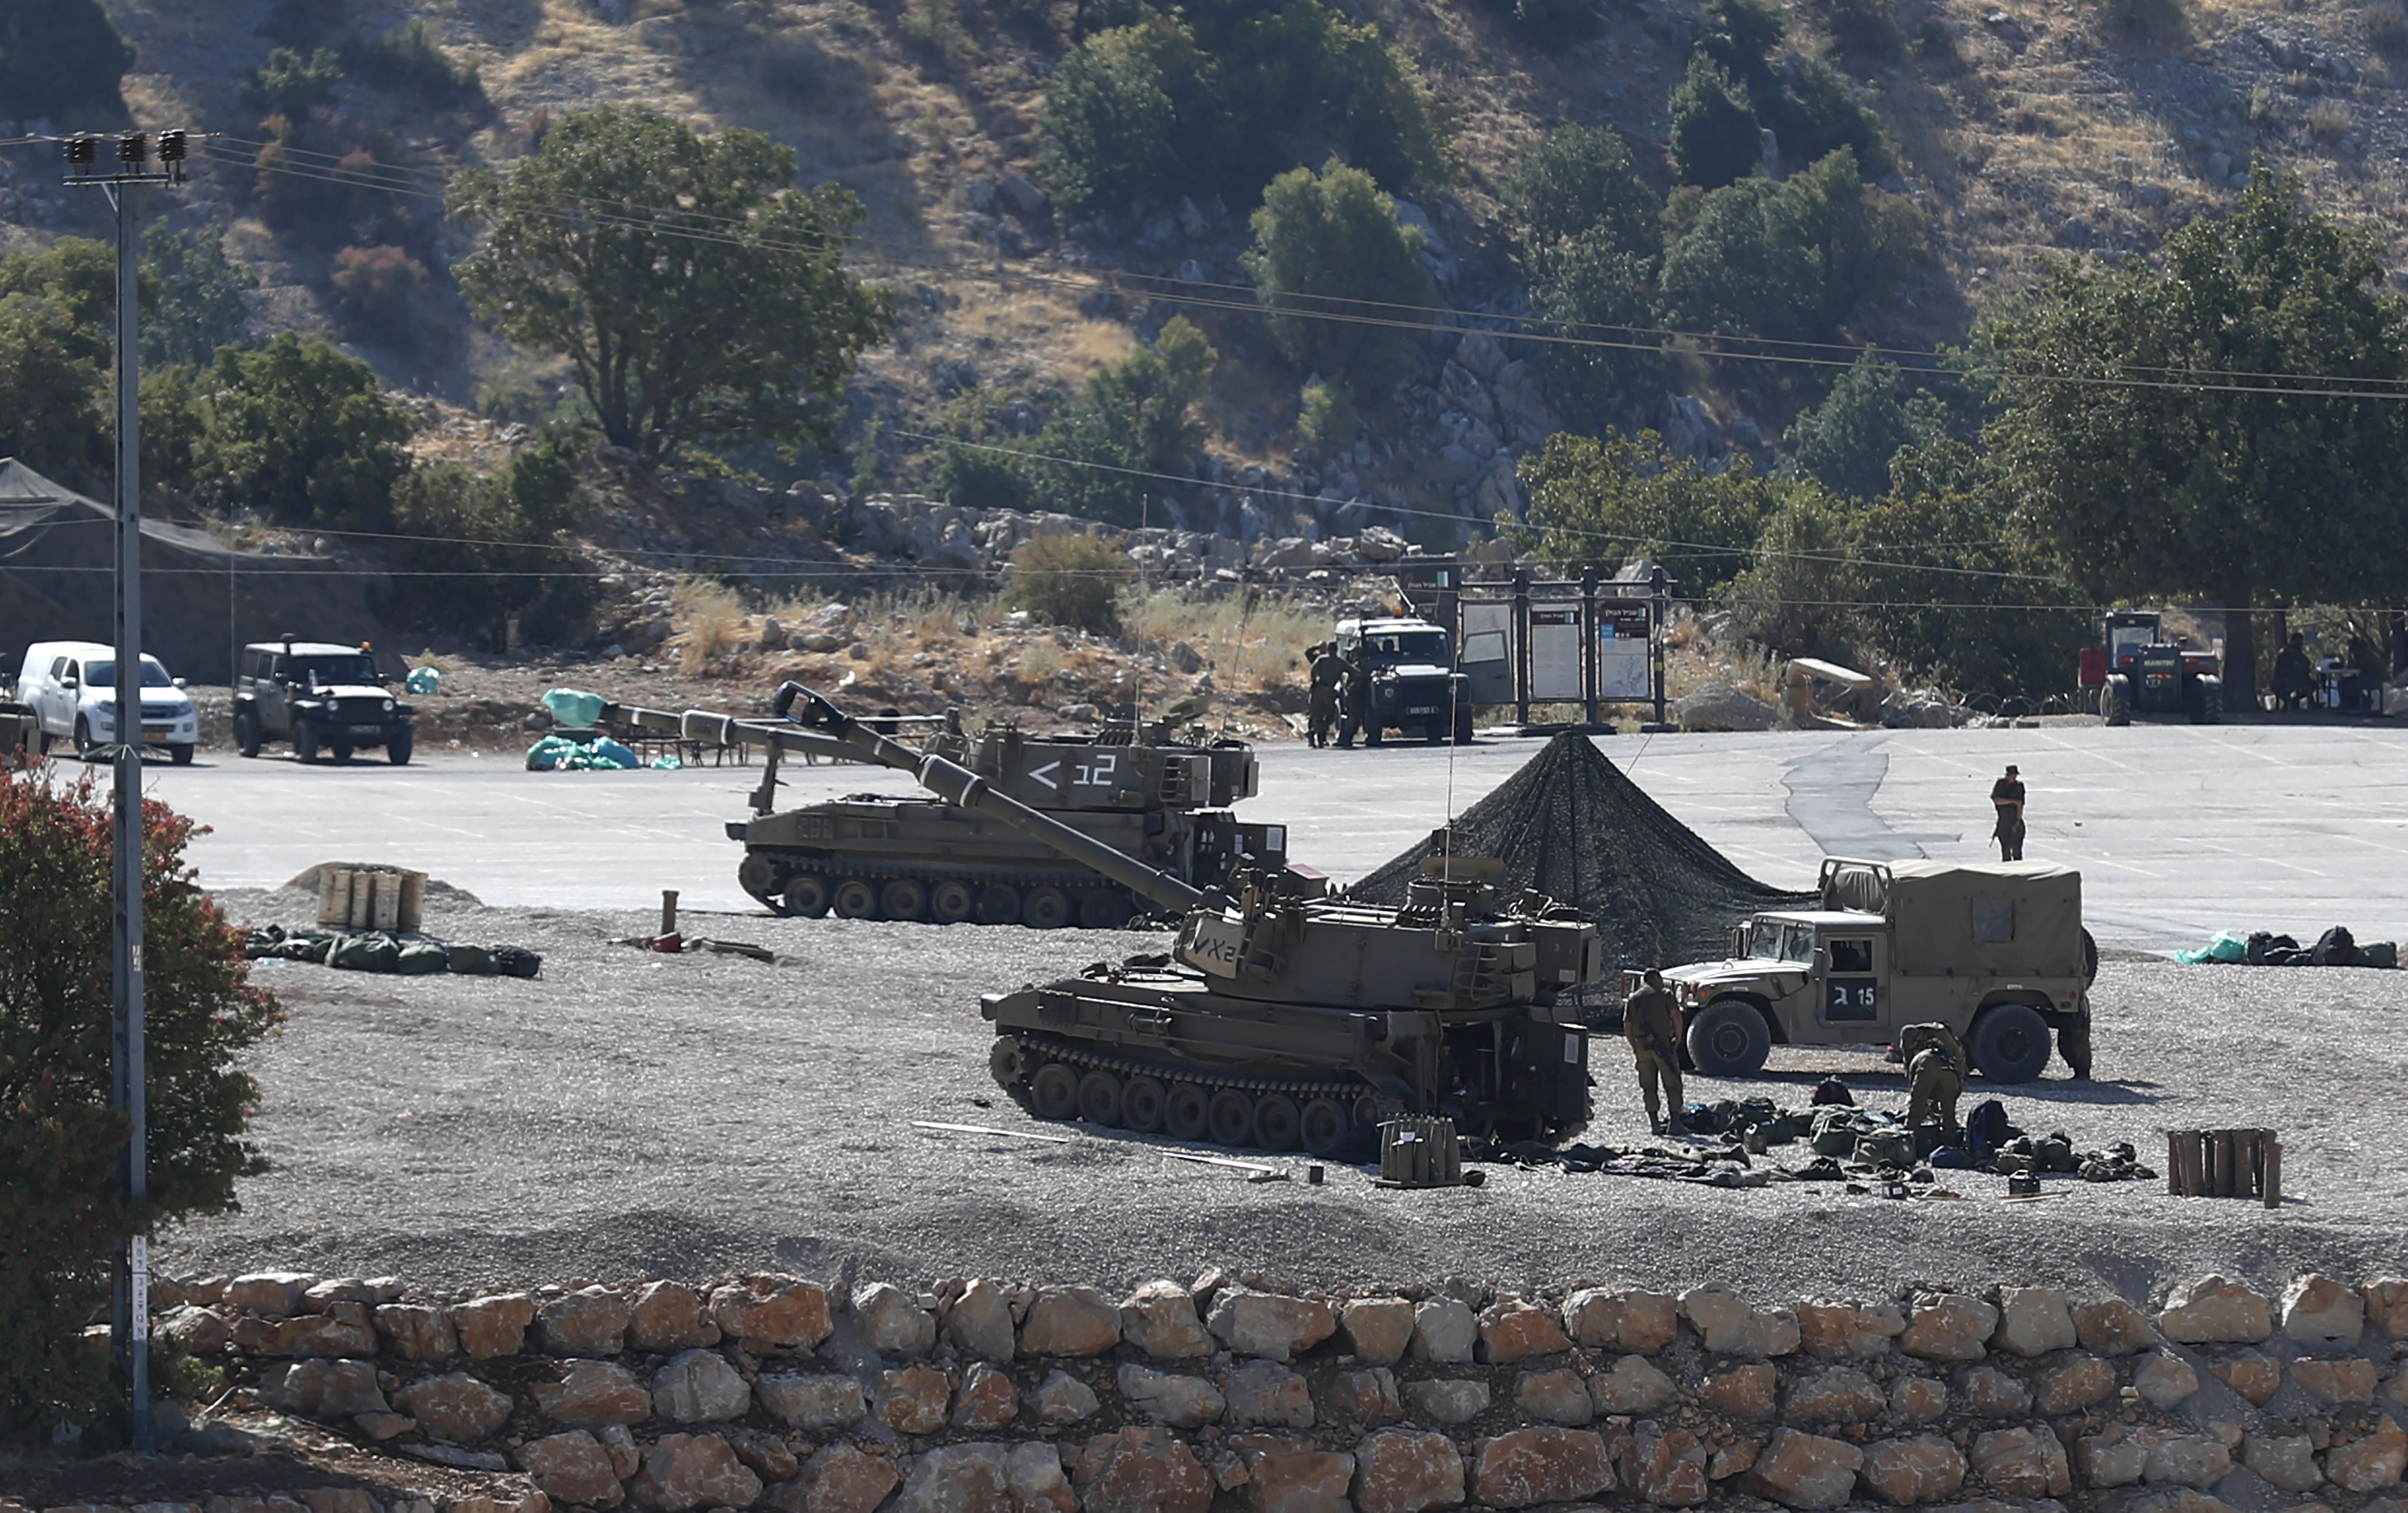 epa07792051 Israeli soldiers with their artillery unit deployed at the Israeli-Syrian border, in the Golan Heights, north of Israel, 25 August 2019. The Israel Defense Forces (IDF) confirmed on the day that overnight its Air Force had struck Iranian Quds Force targets in Syria. In reactions to the incident, the Israeli deployed artillery units and the Iron Dome at the border with Syria.  EPA/ATEF SAFADI